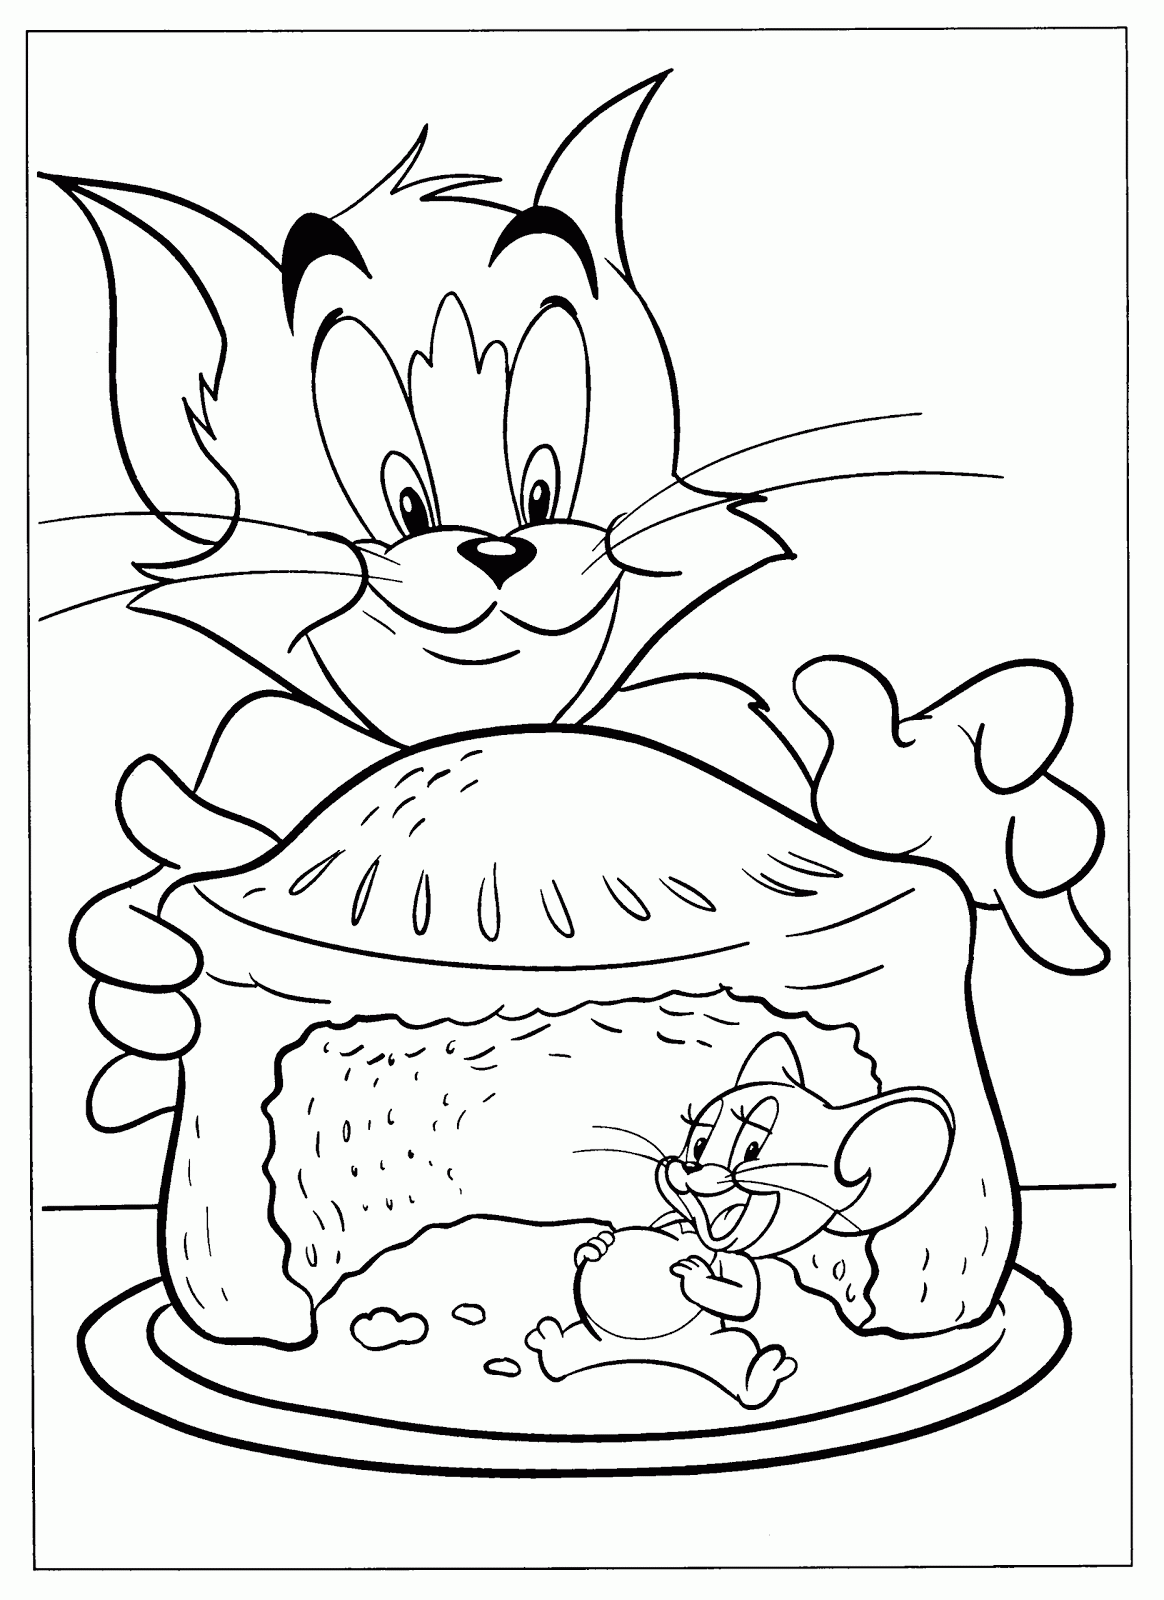 tom and jerry coloring pages online free printable tom and jerry coloring pages for kids jerry pages and coloring online tom 